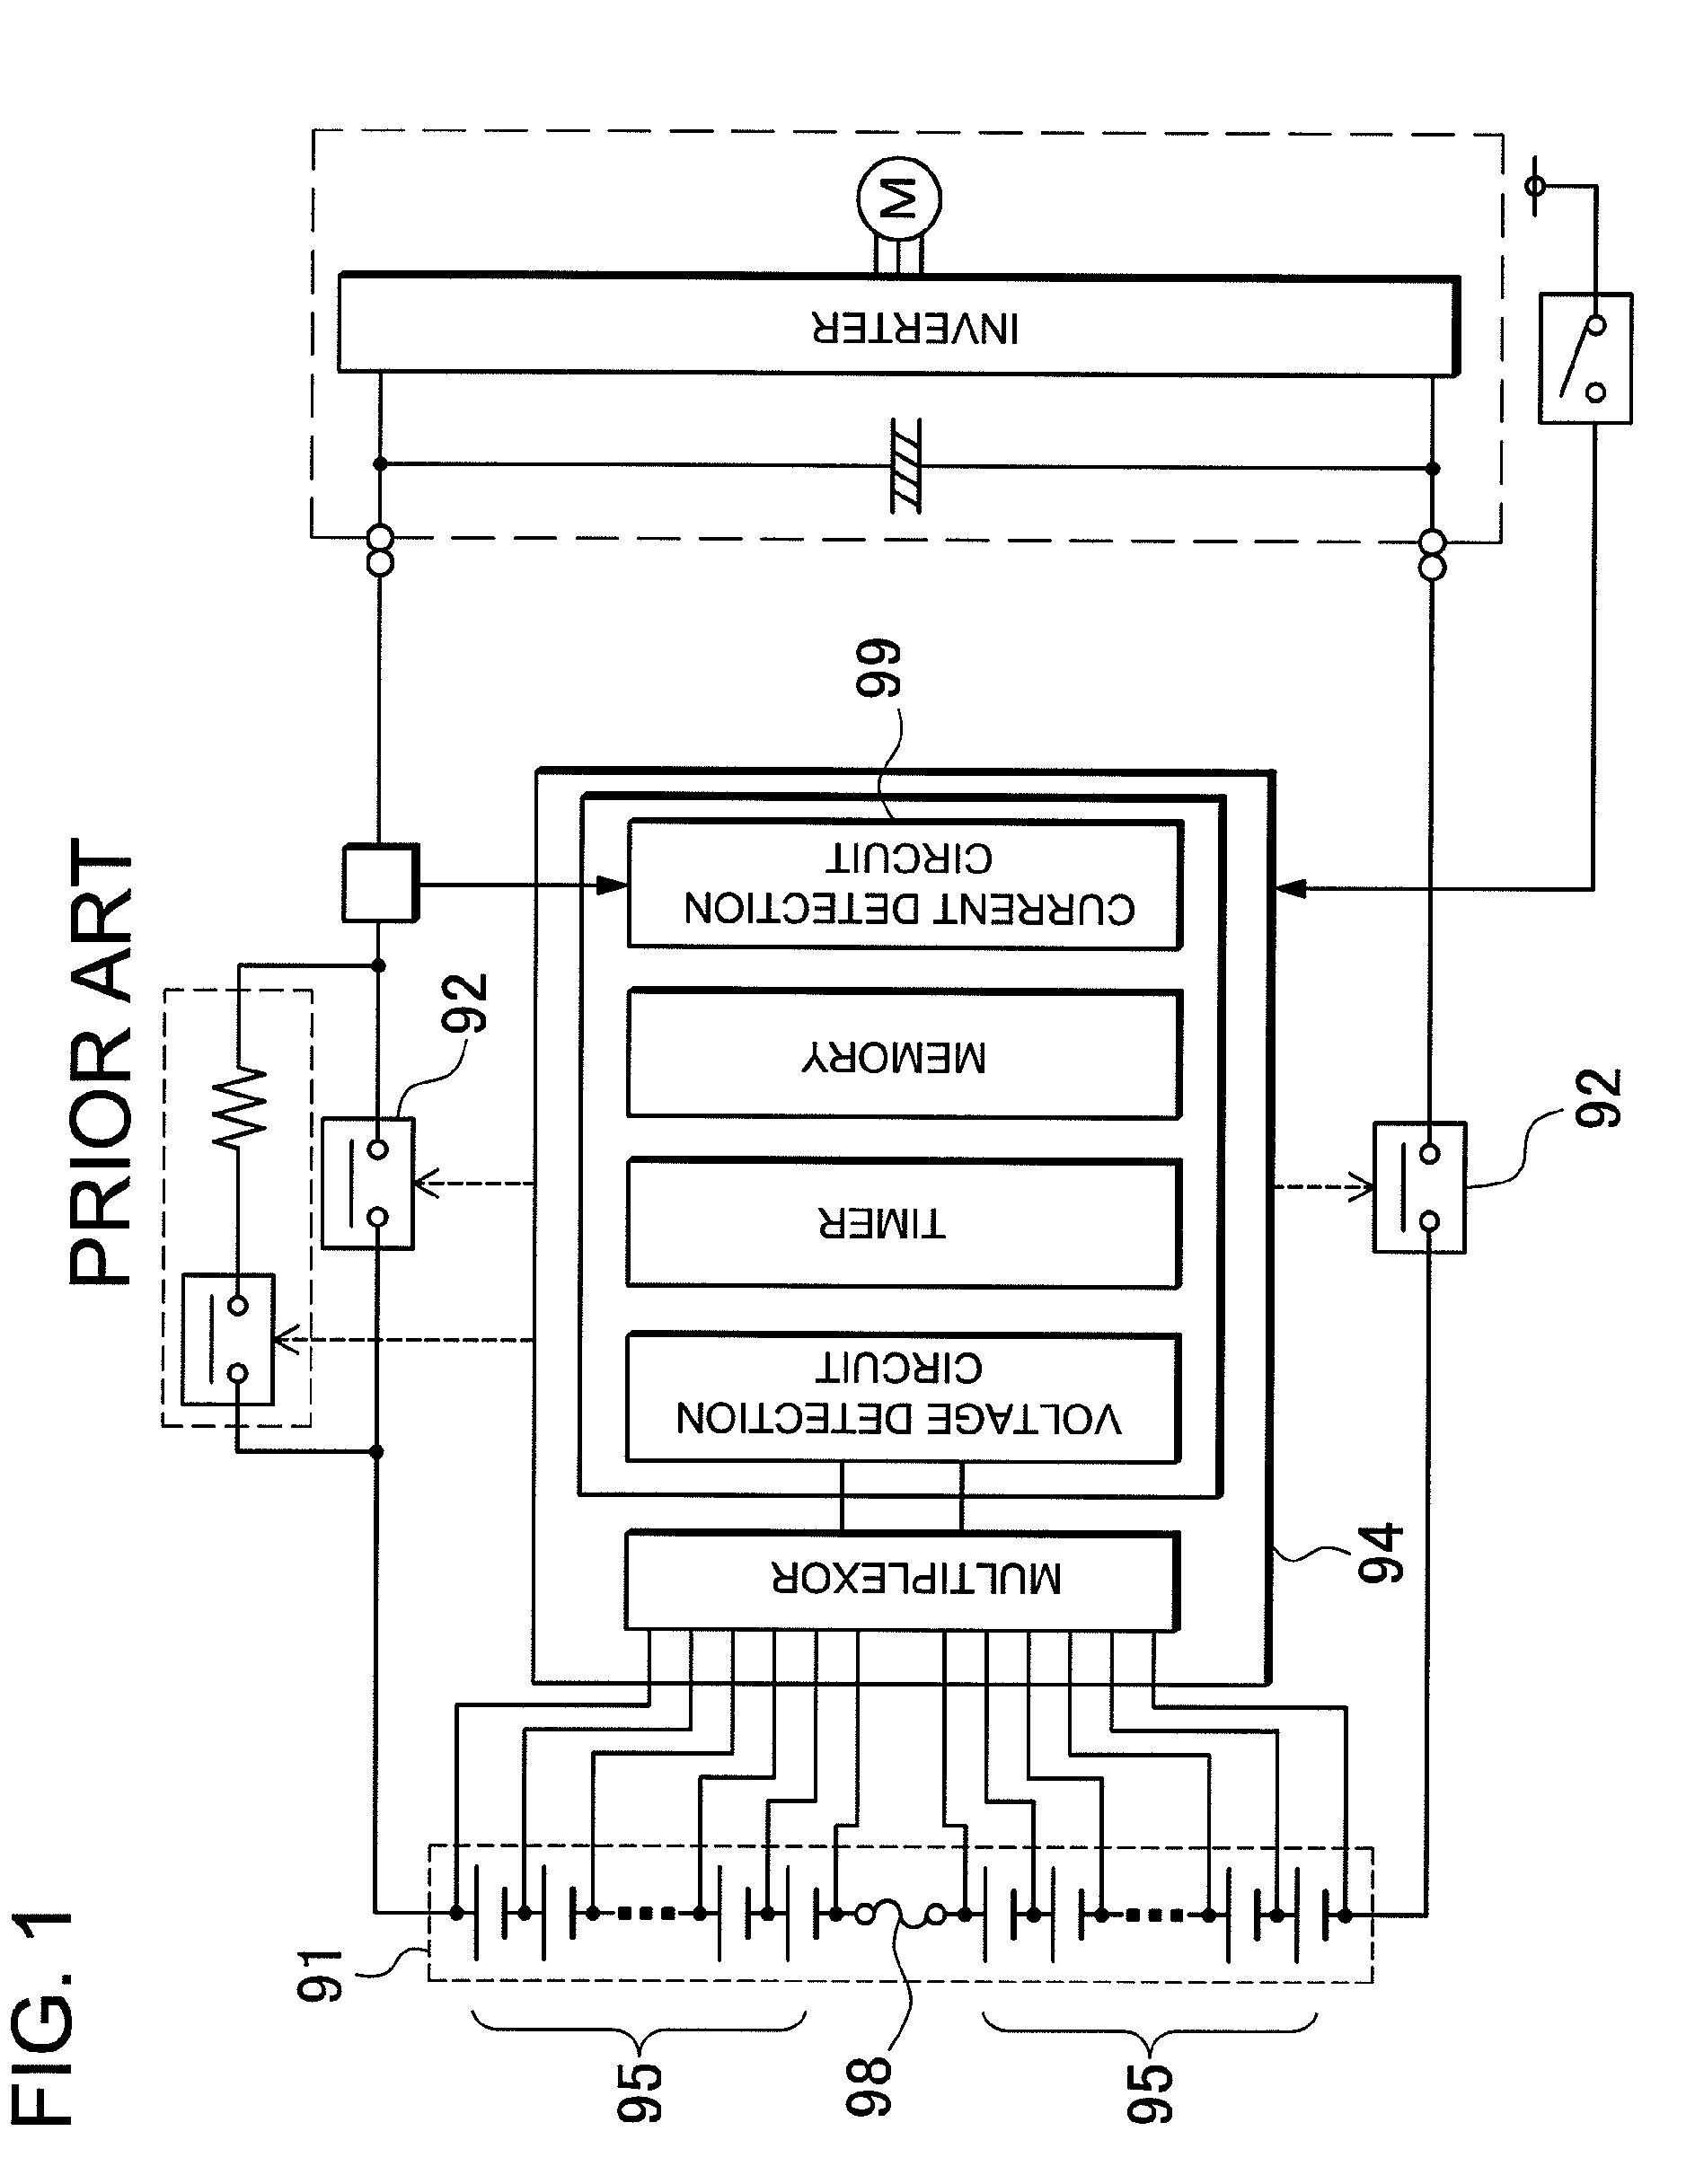 Battery system with relays